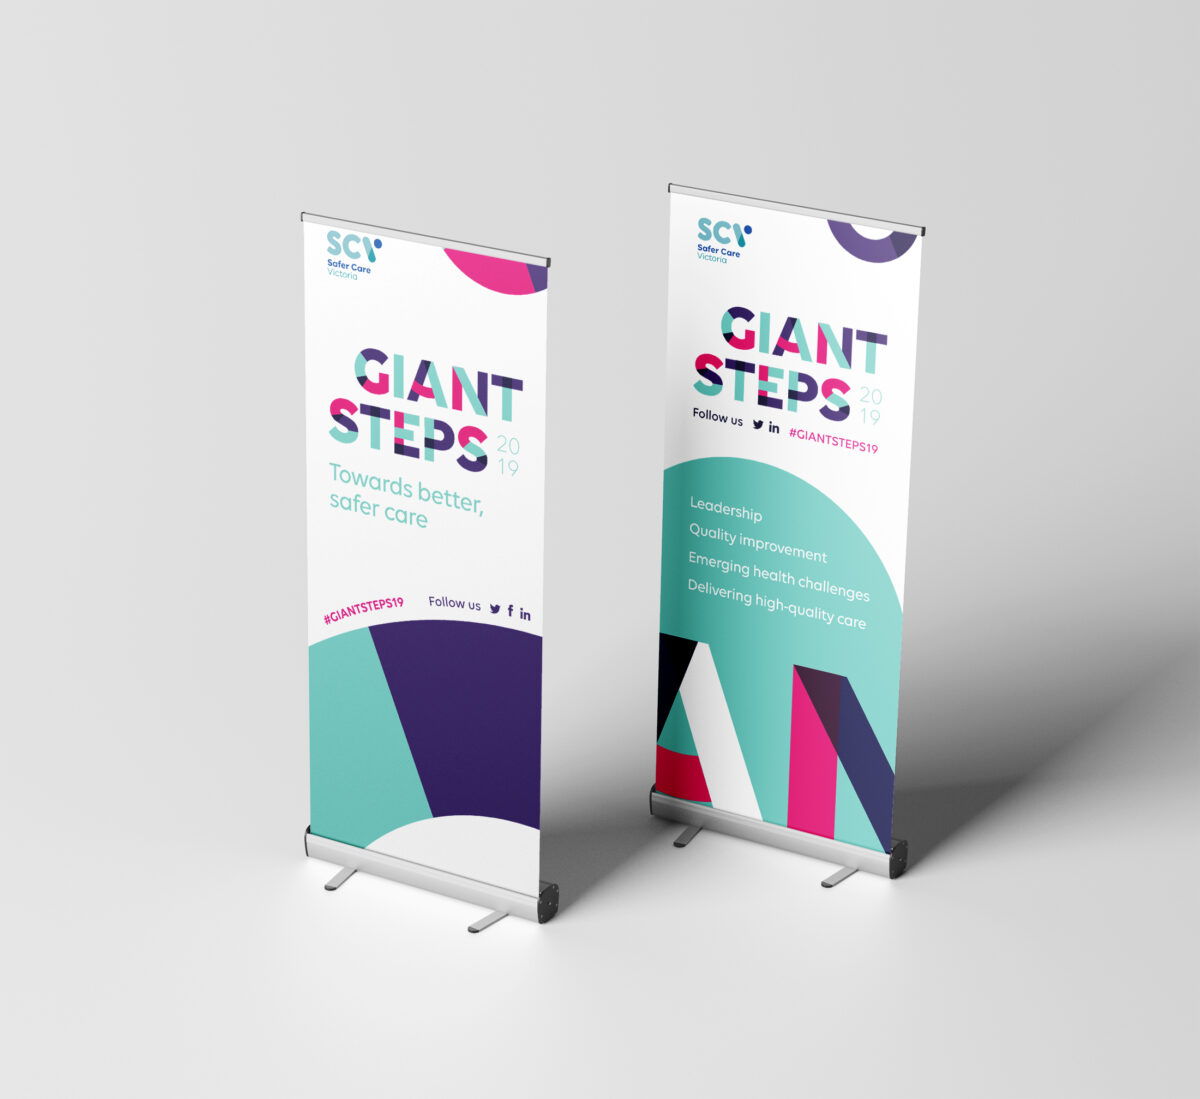 design agency for Giant Steps campaign